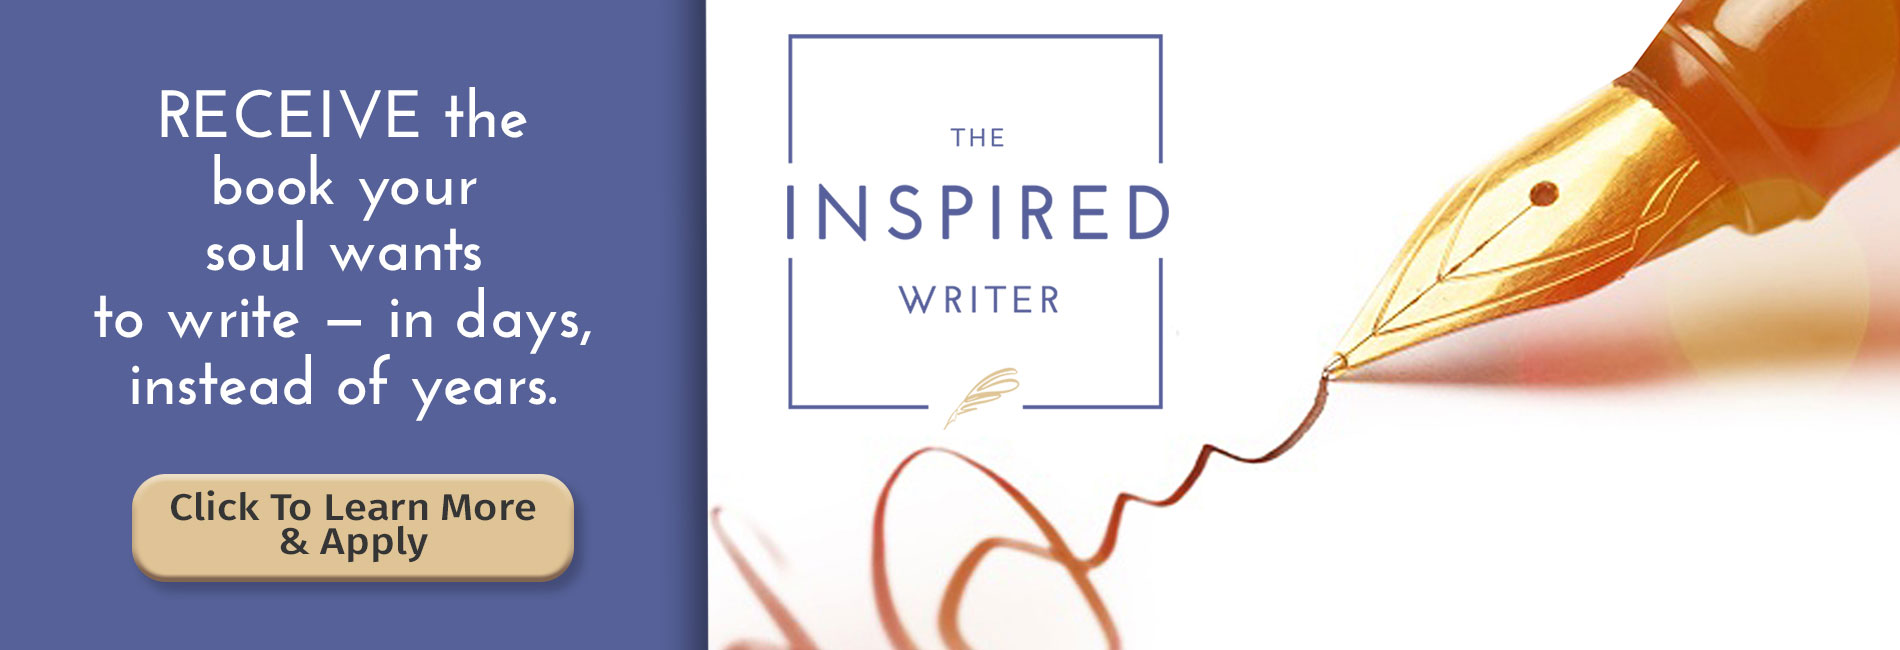 The Inspired Writer graphic for more information